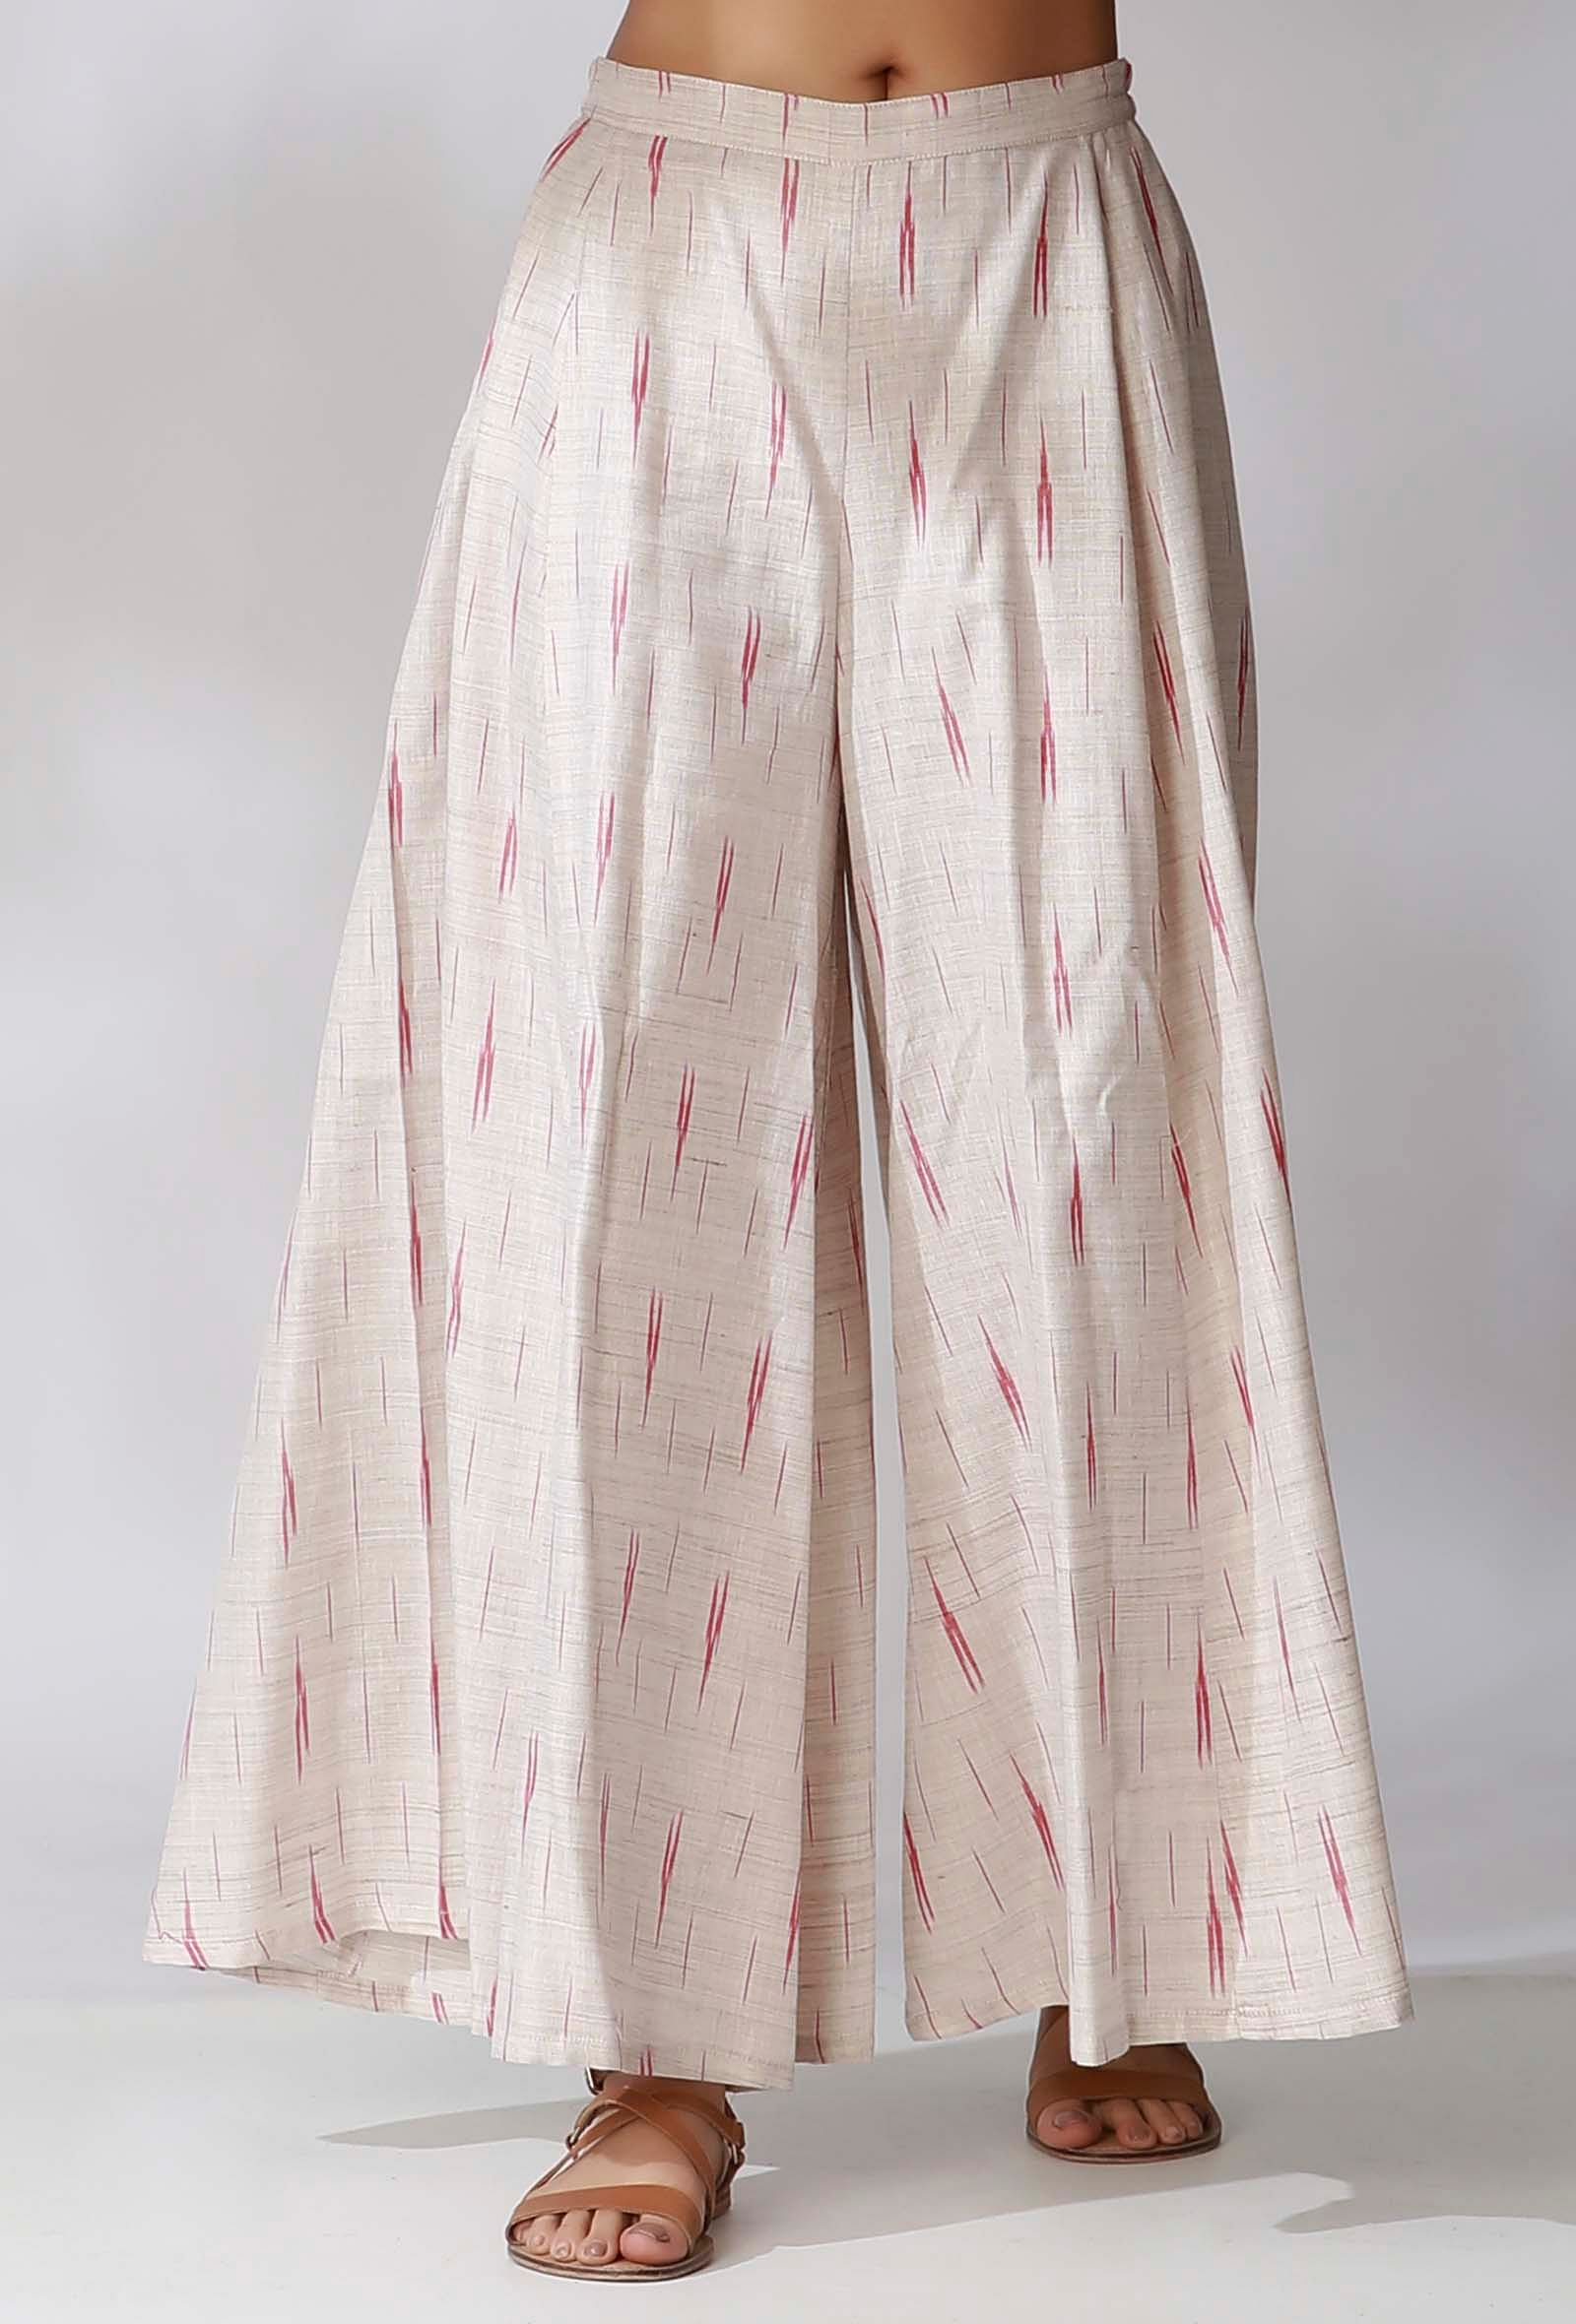 White And Maroon Flared Ikkat Wide Pants